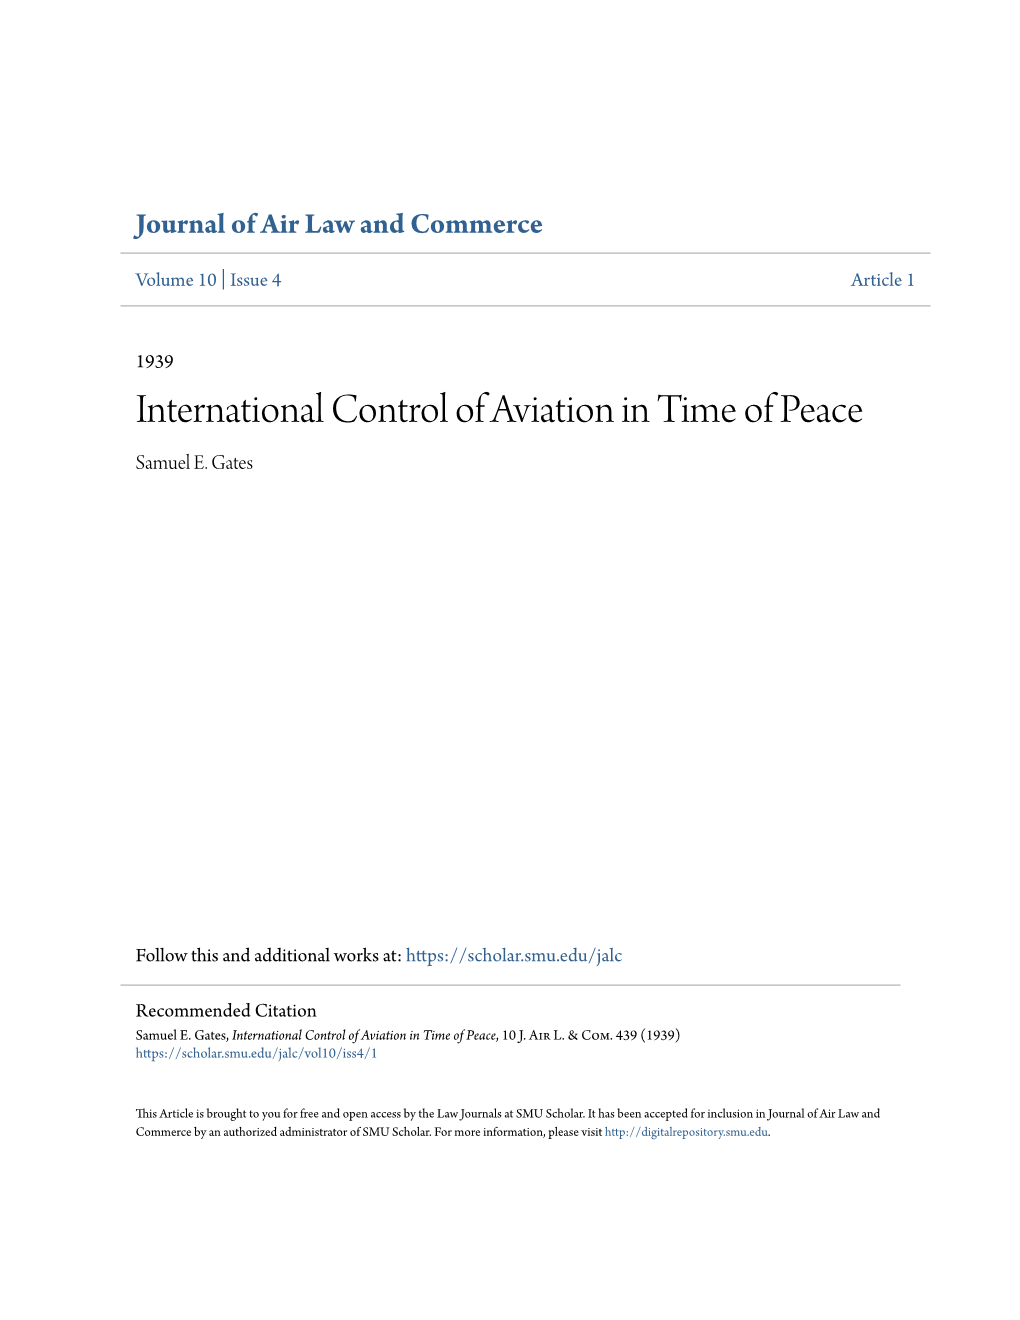 International Control of Aviation in Time of Peace Samuel E